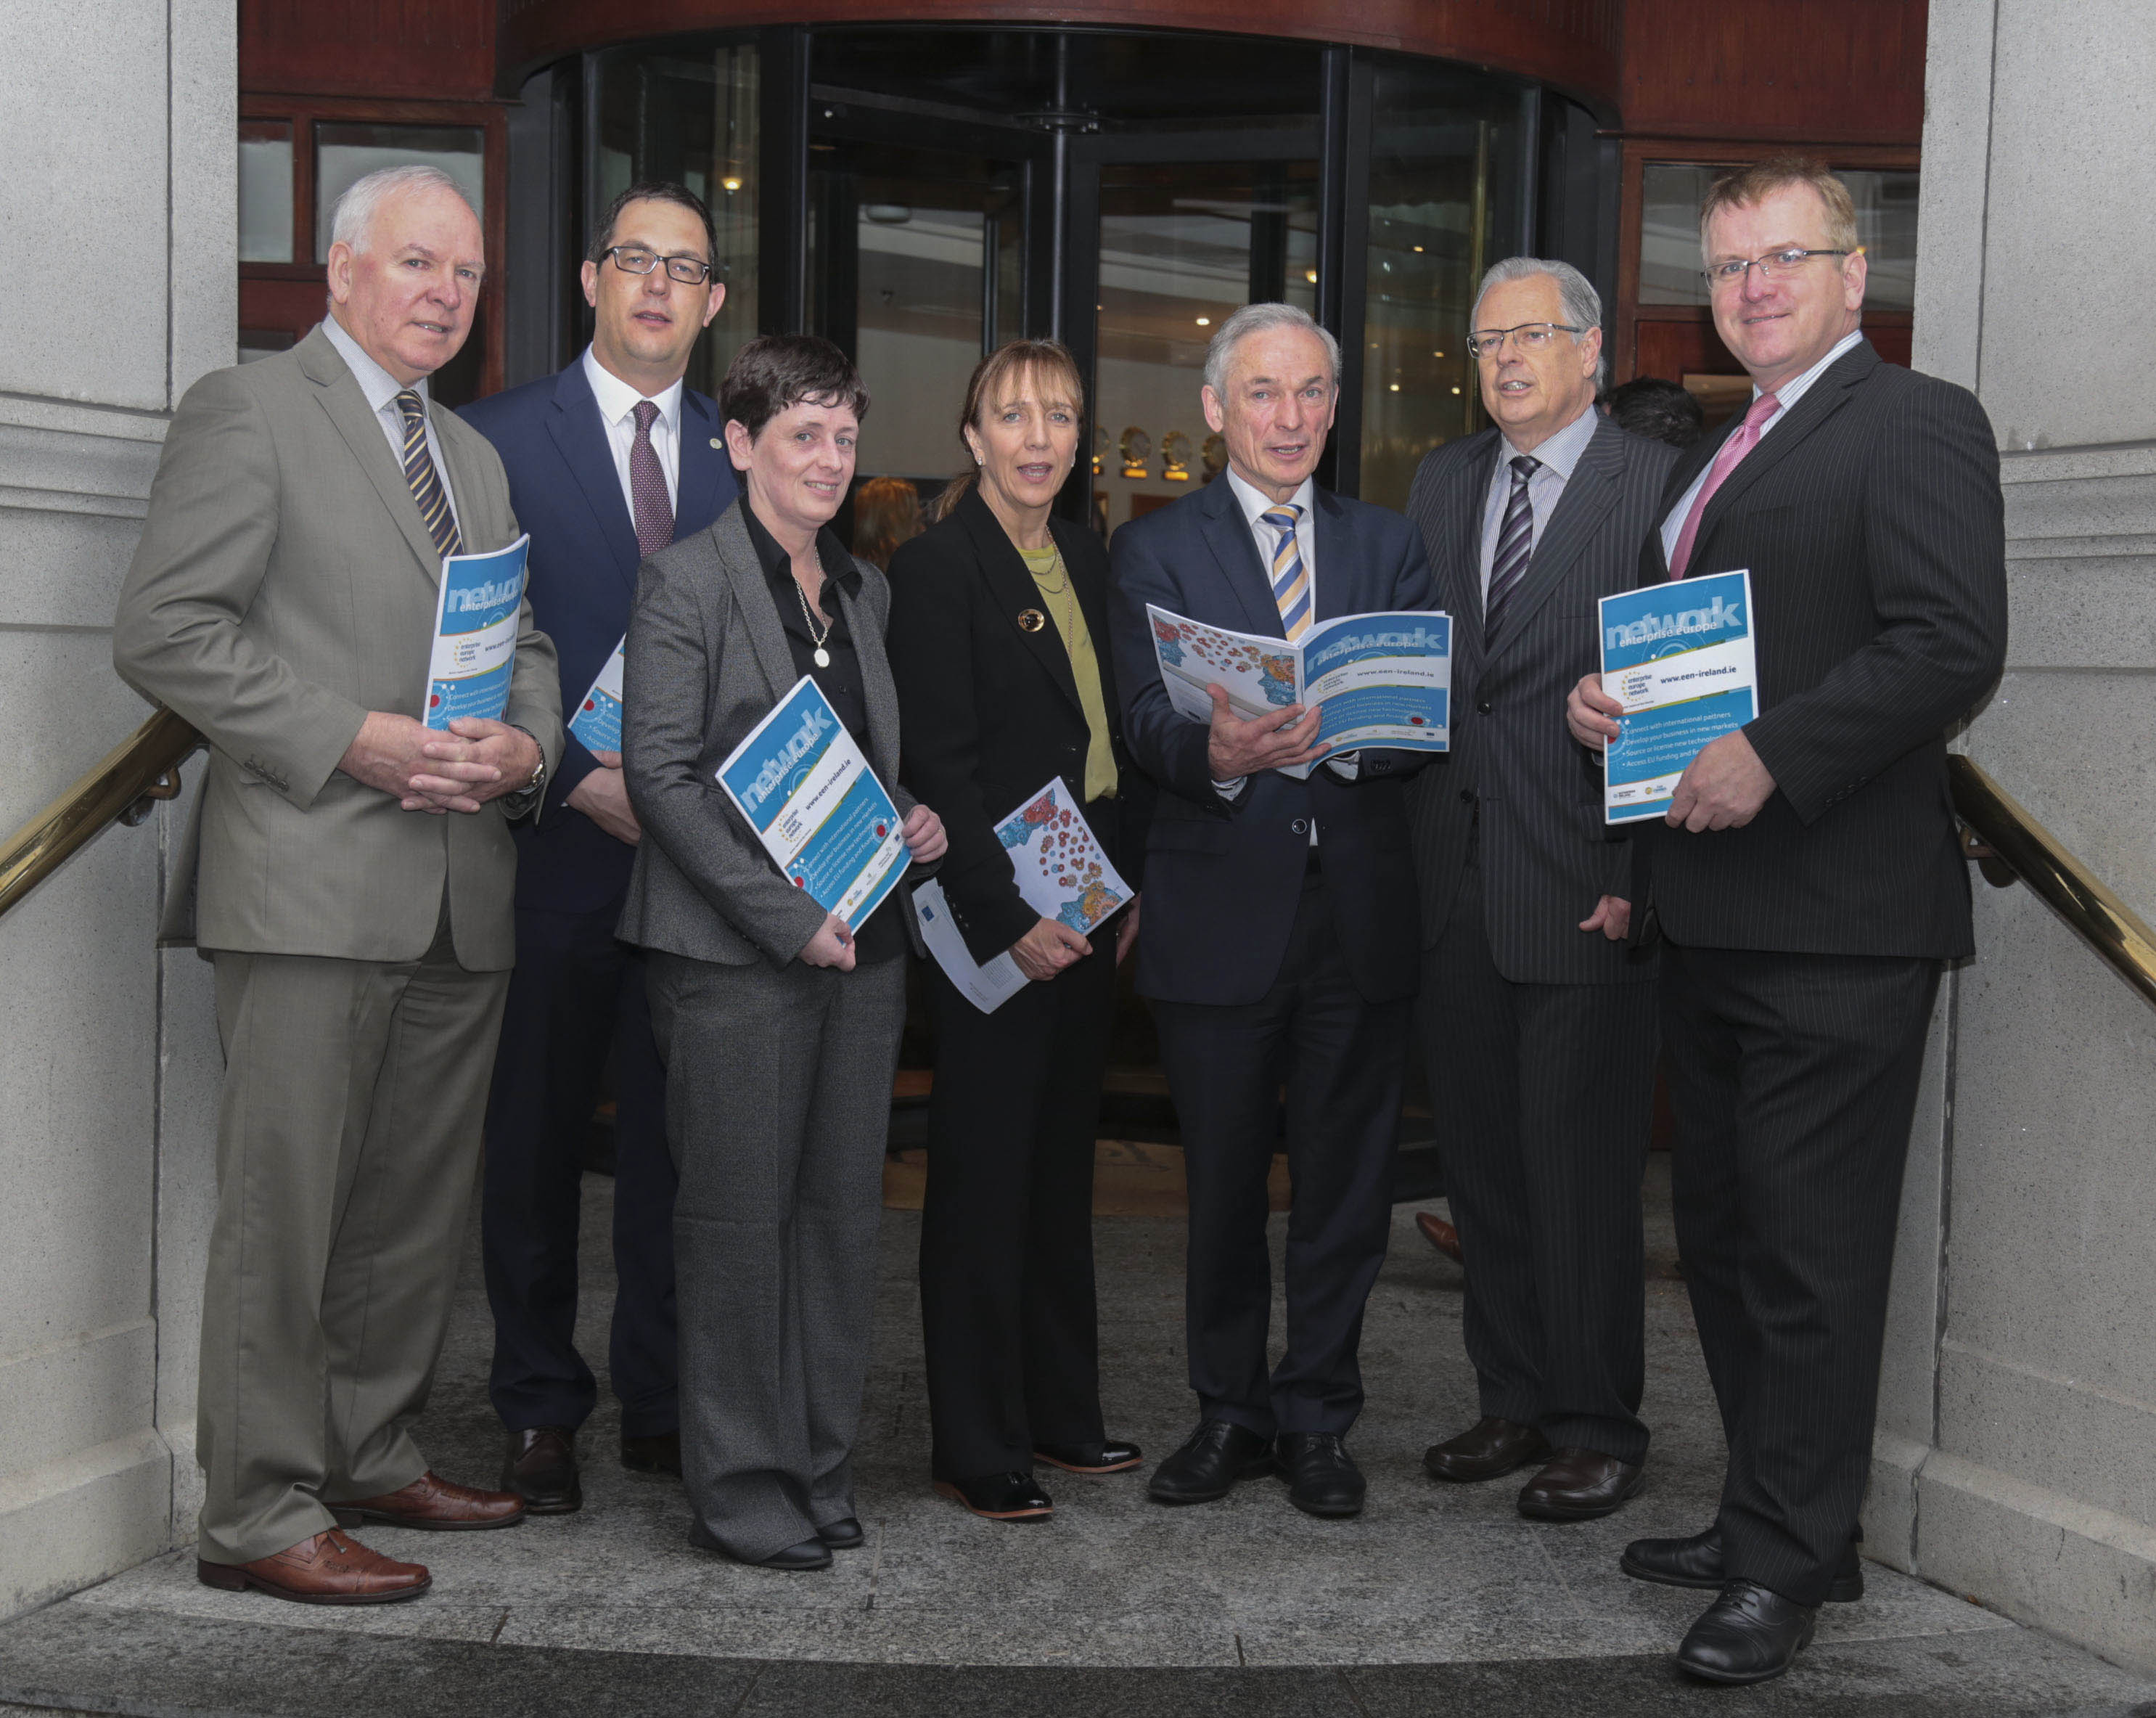 Global business opportunities open up for Irish SMEs through the Enterprise Europe Network